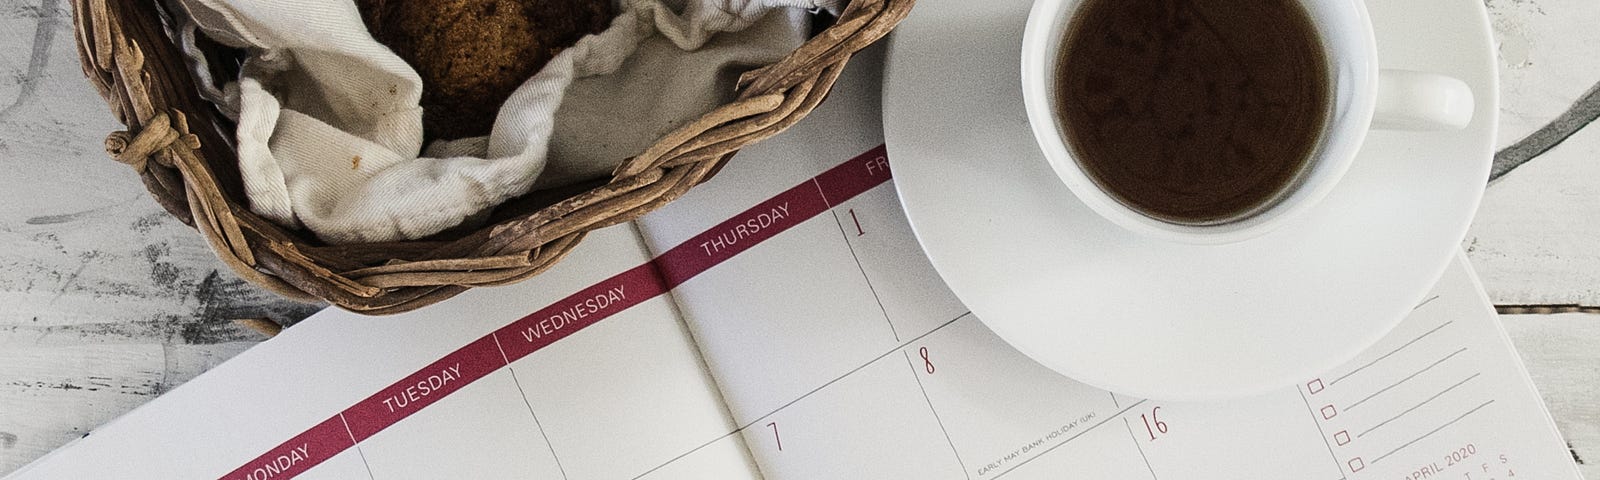 Image of open calendar book with coffee cup on the corner of it.